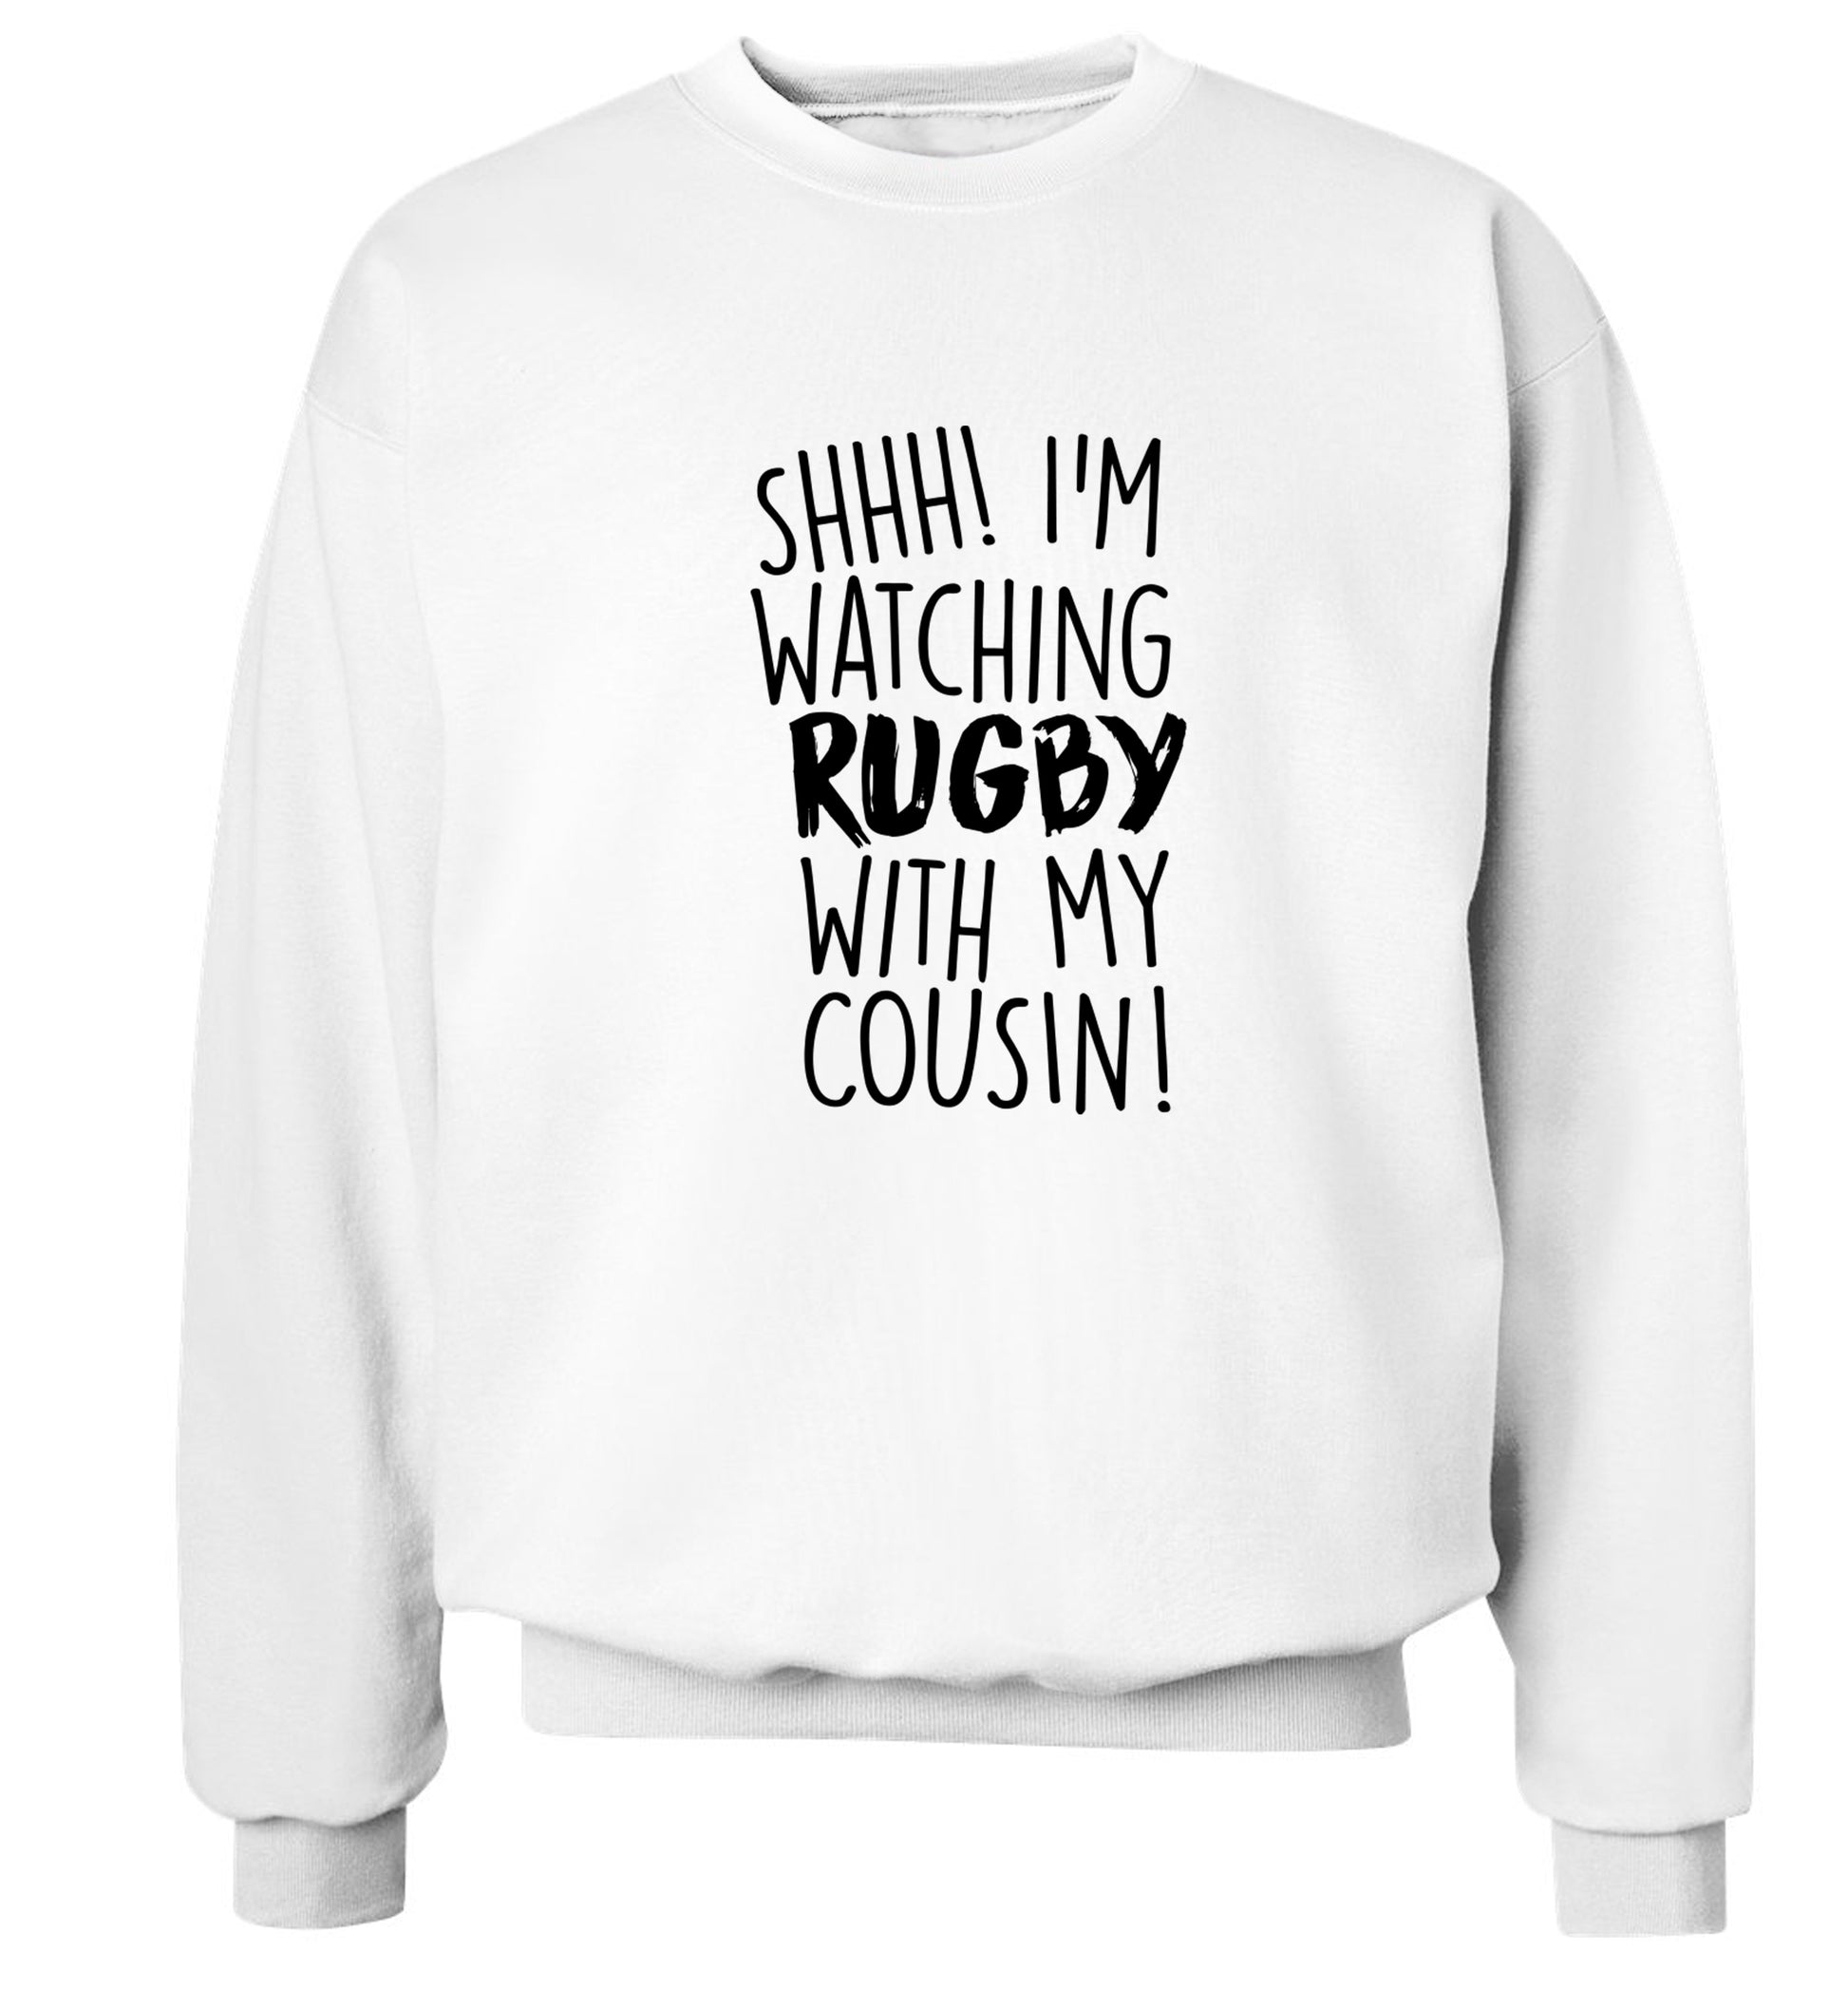 Shhh I'm watching rugby with my cousin Adult's unisex white Sweater 2XL